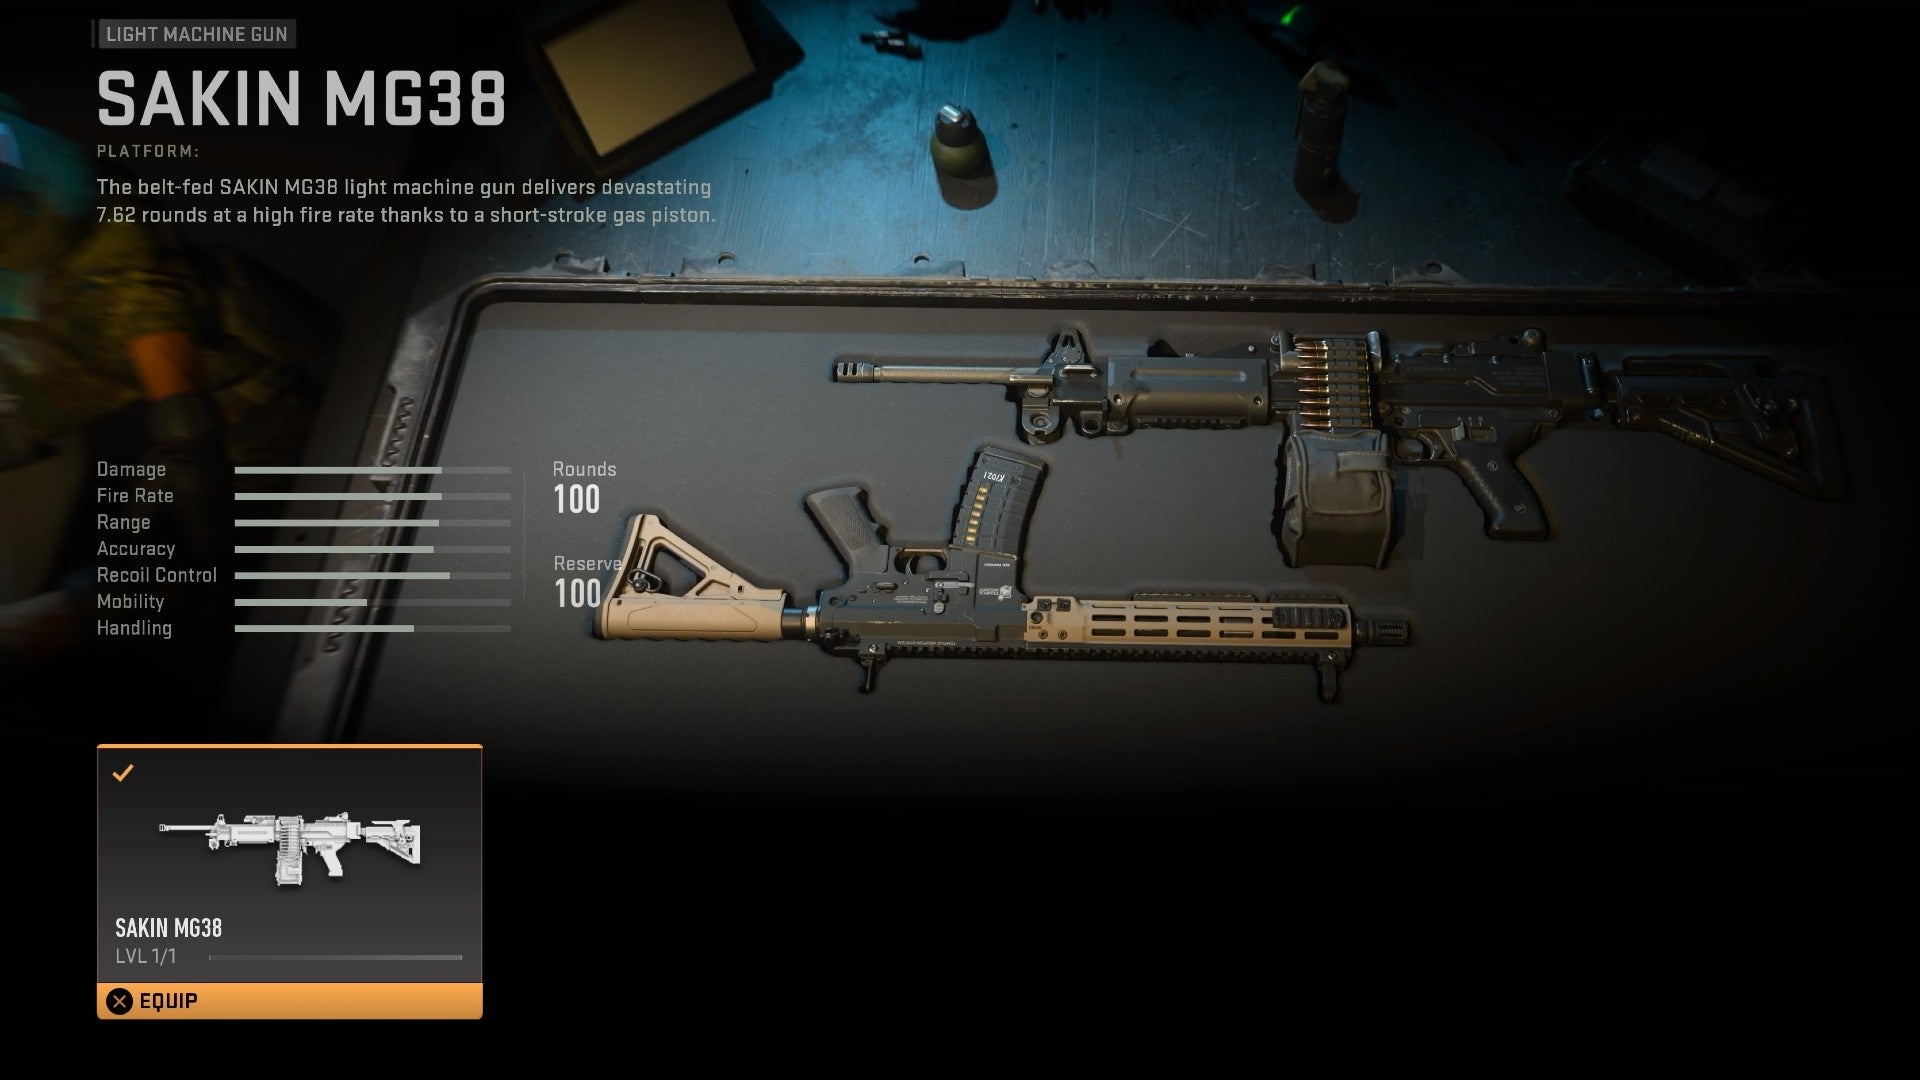 Modern Warfare 2 beta screenshot showing the Sakin LMG in a weapons container, with the stats on the left.